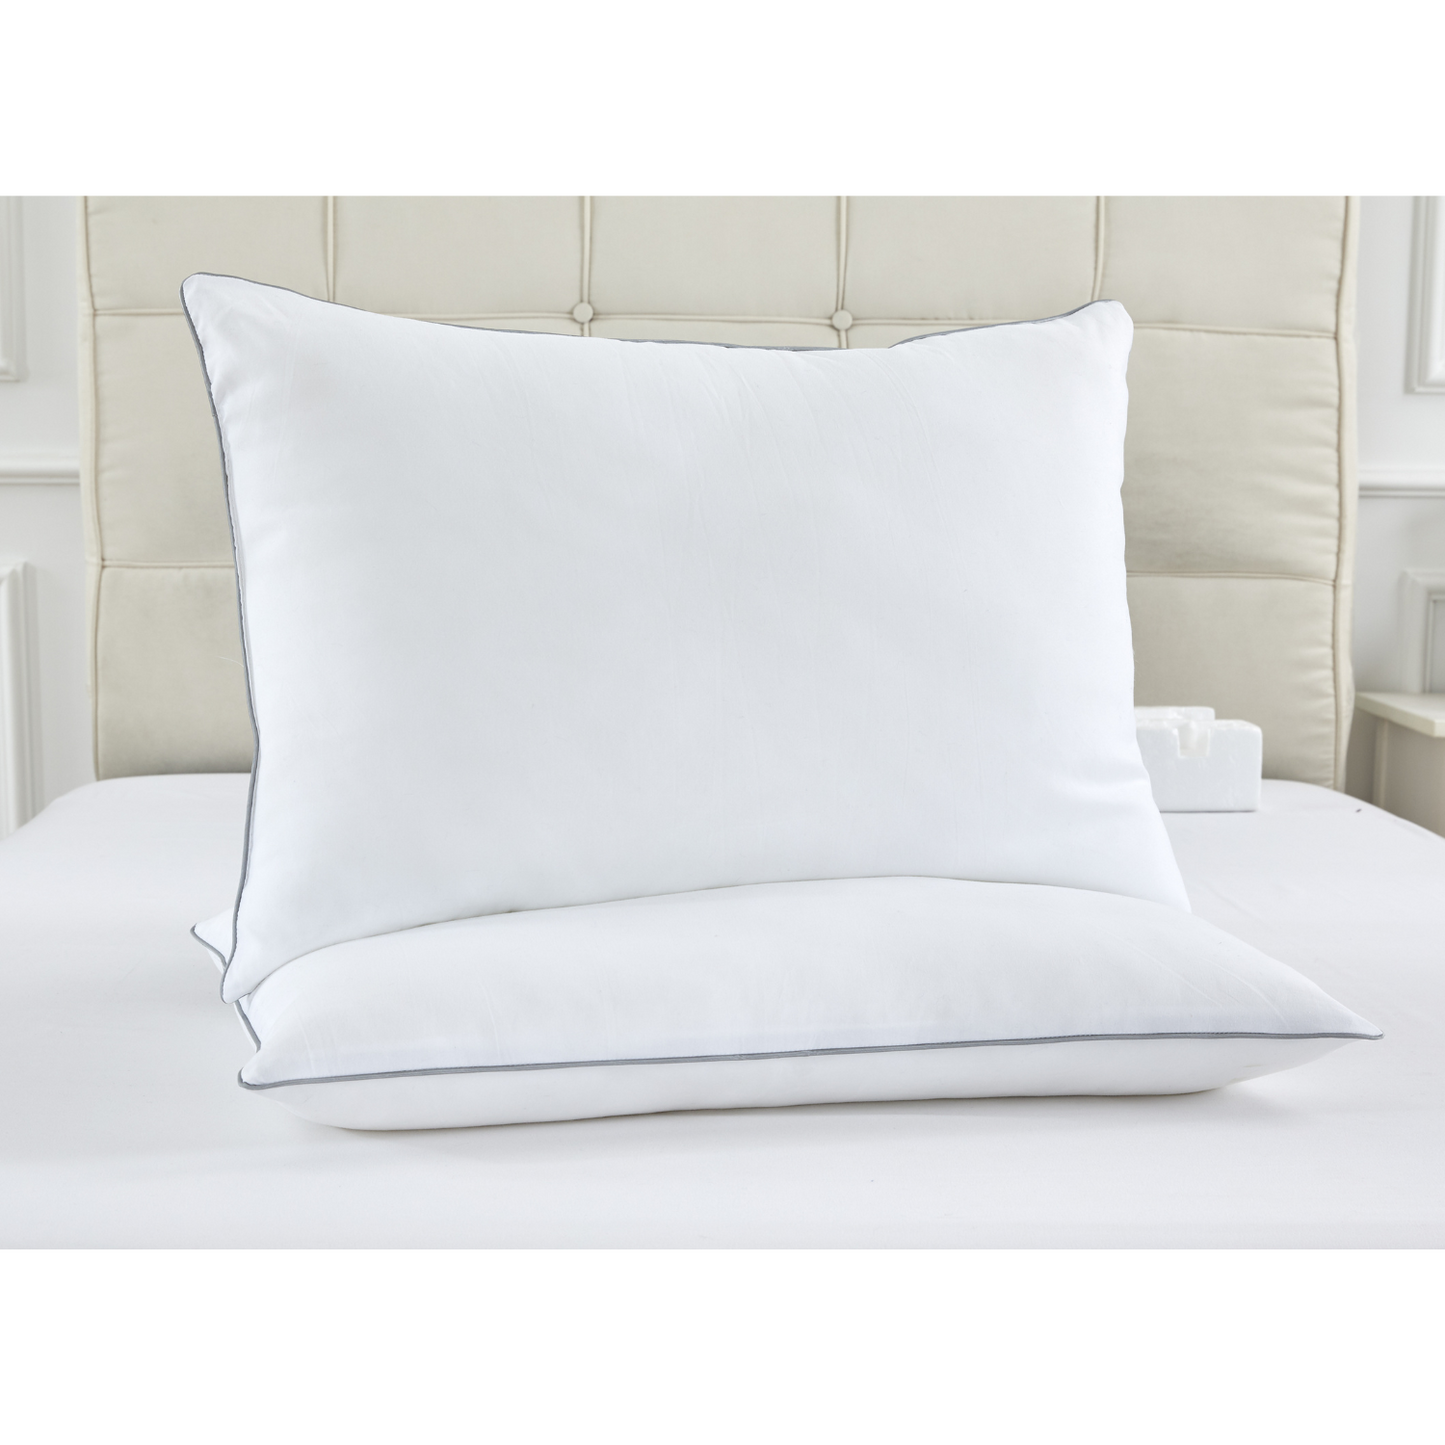 Piped Edge Pillow Set, White, Queen Size, 2 pc Set